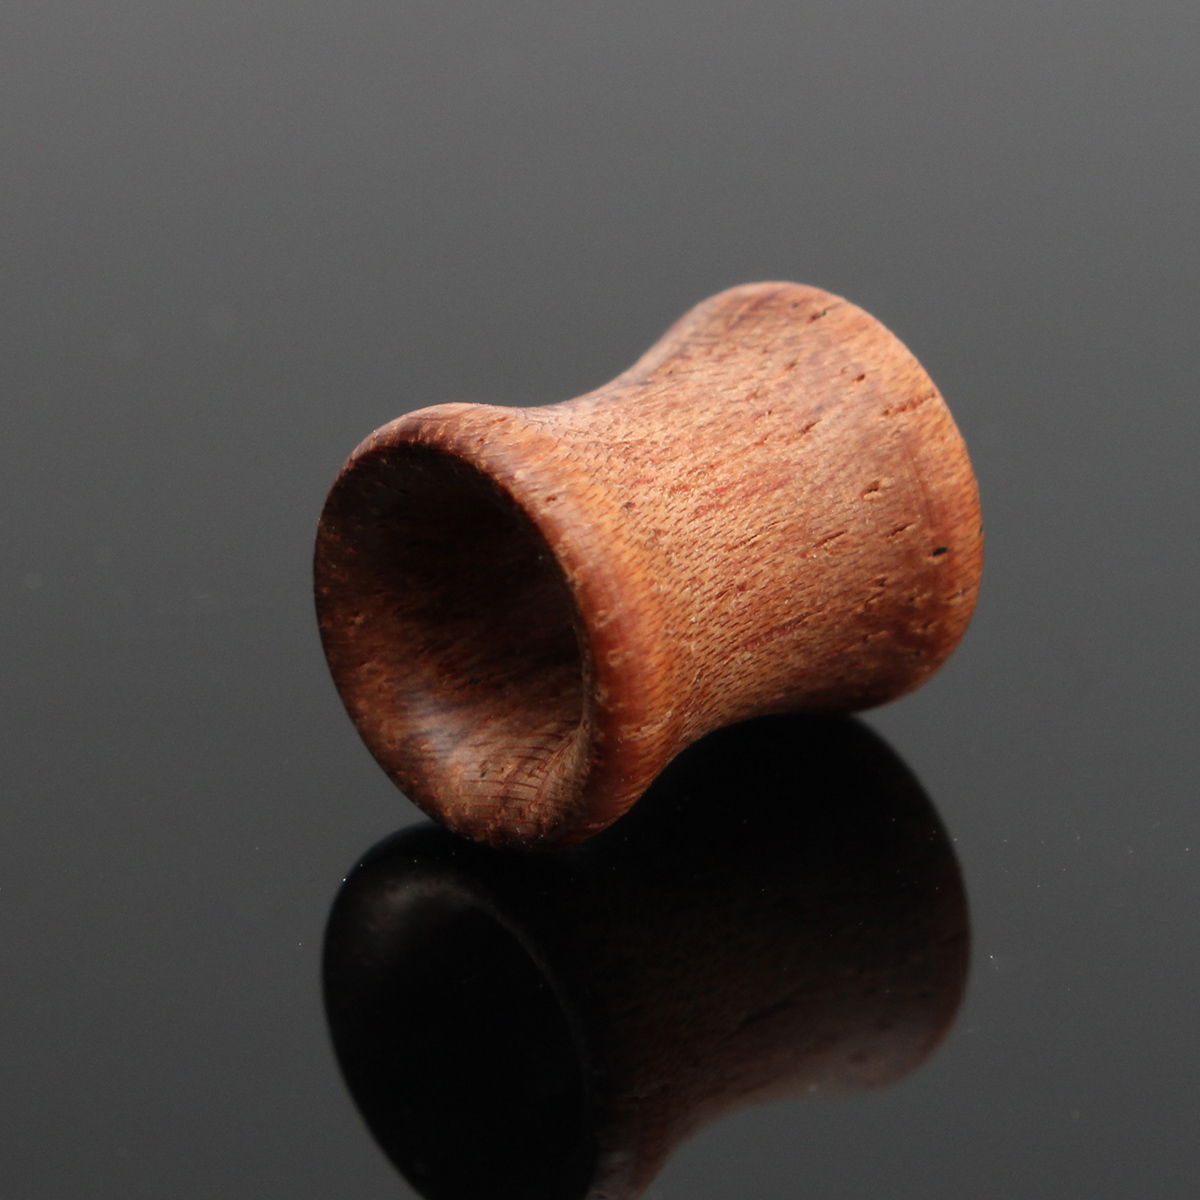 8mm-20mm-1pc-Wooden-Tunnels-Ear-Gauges-Plugs-Hollow-Expander-1061323